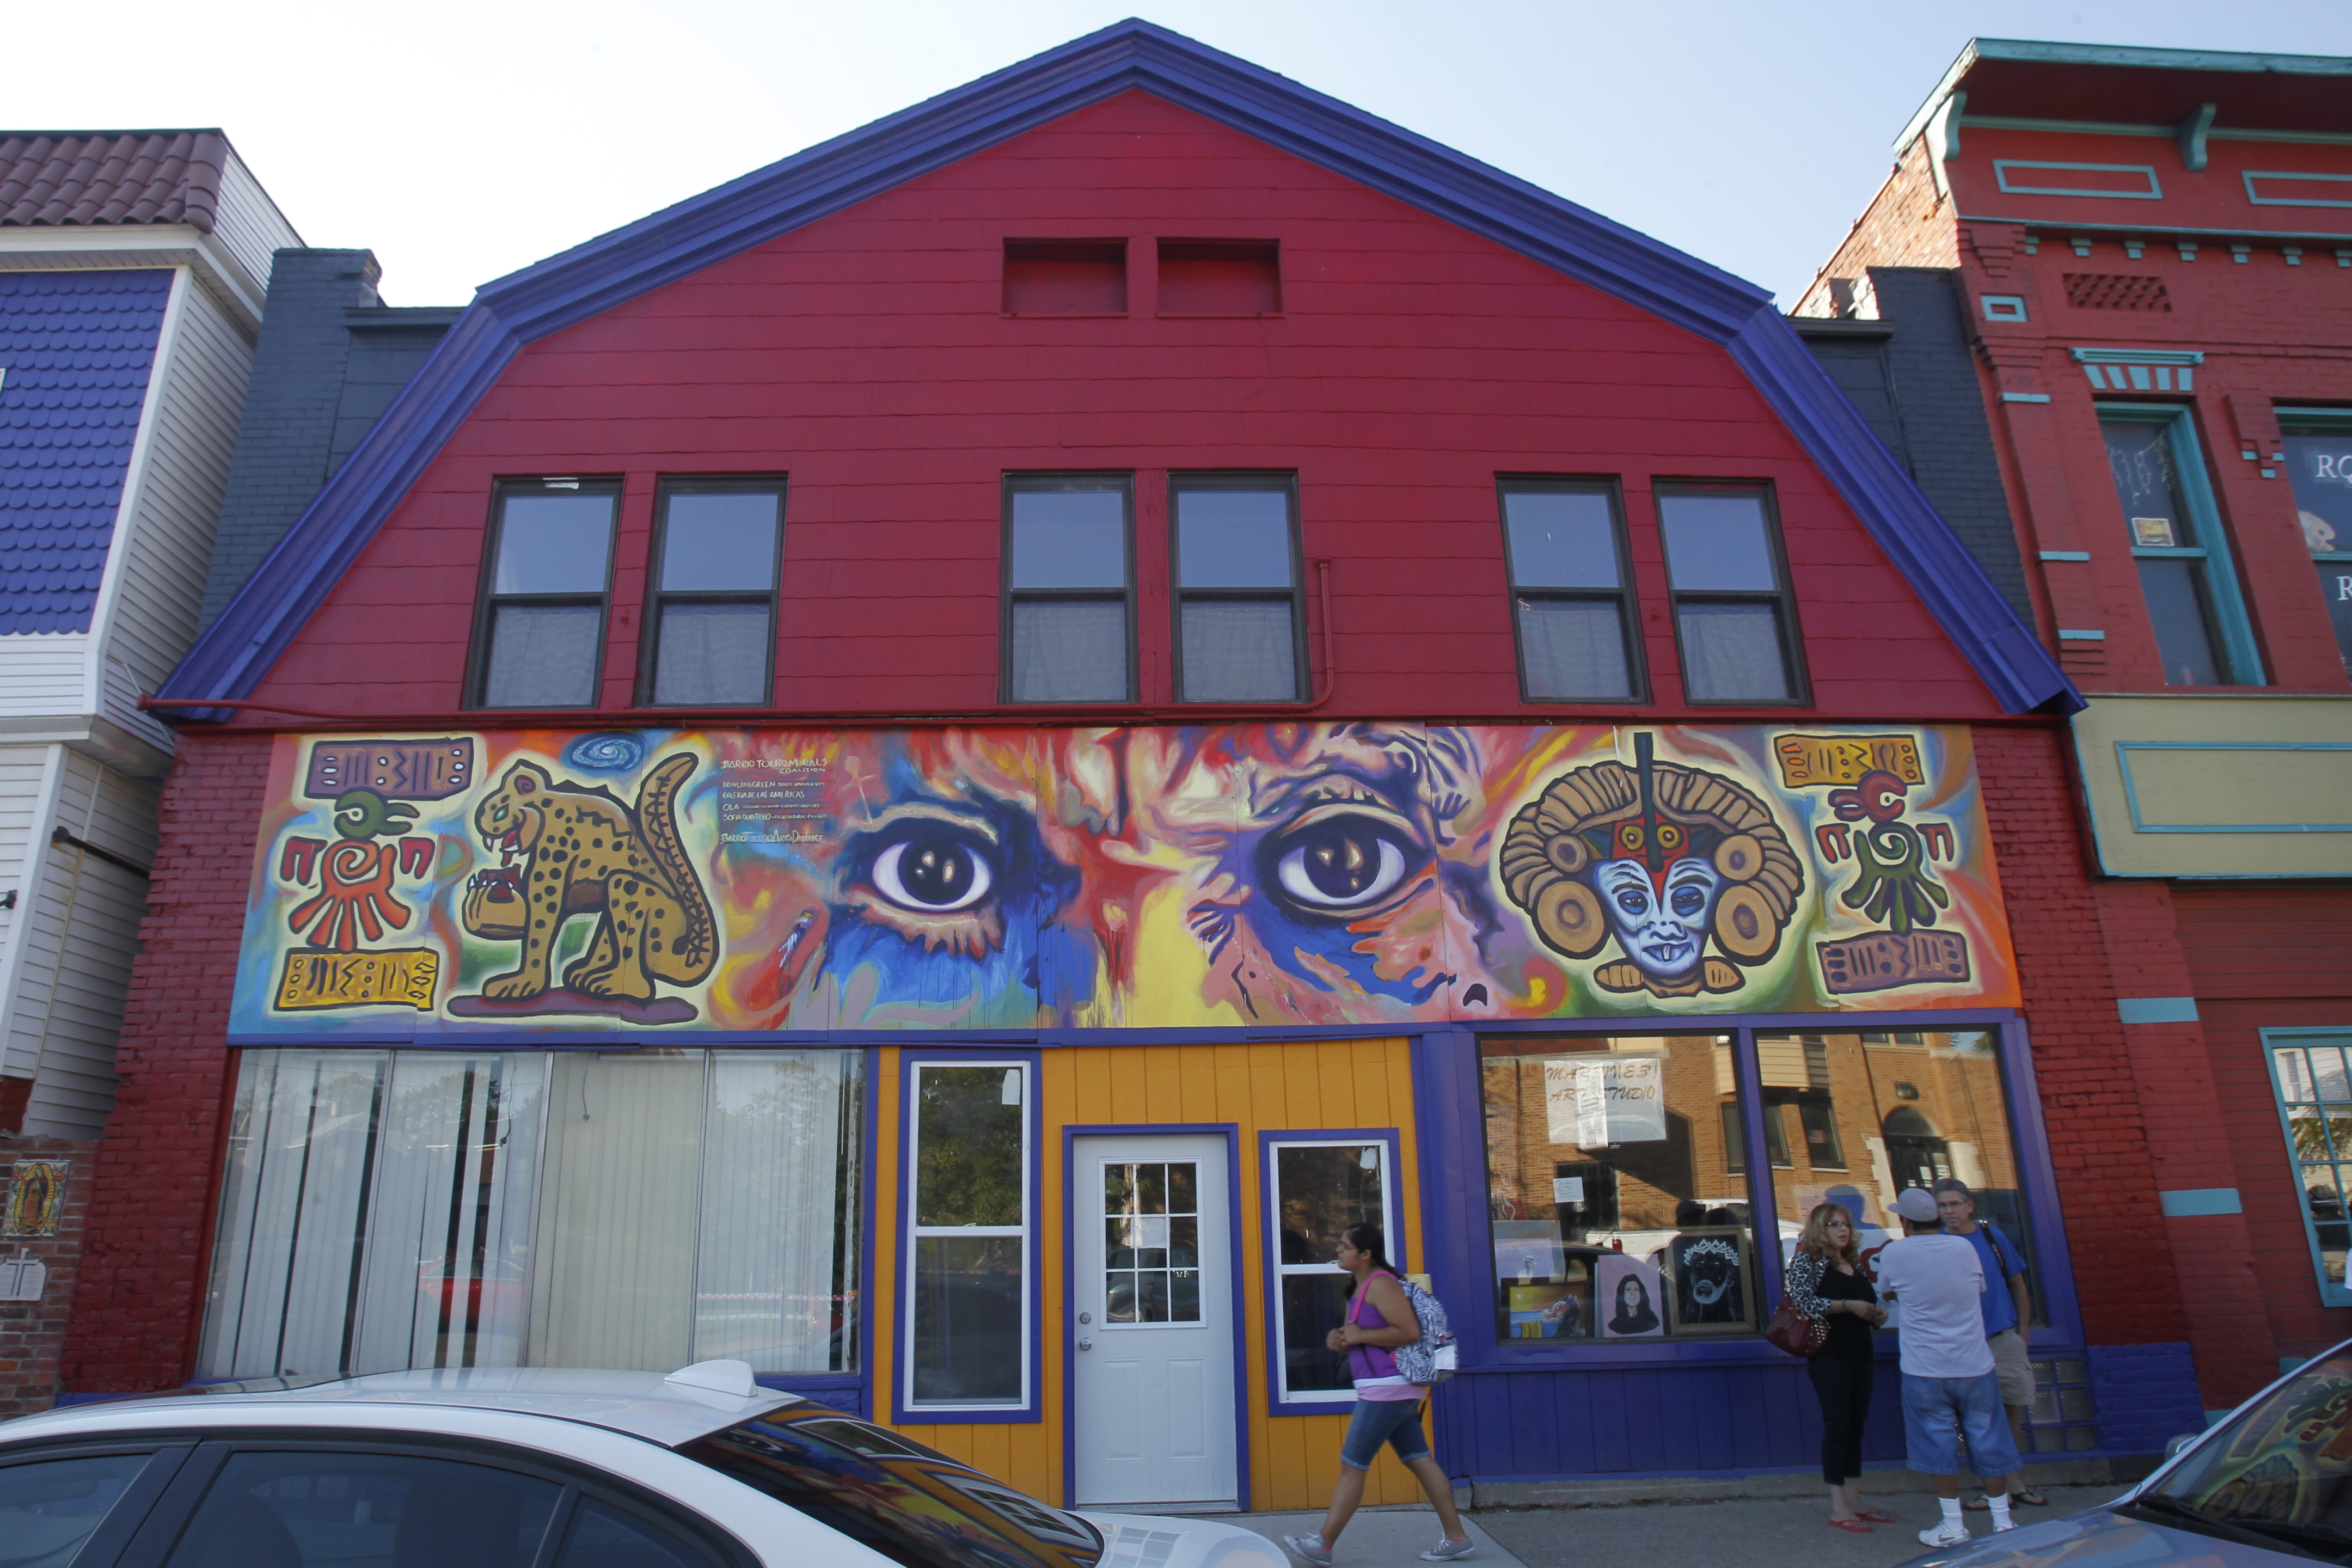 Dazzling murals light up Old South End - The Blade4320 x 2880